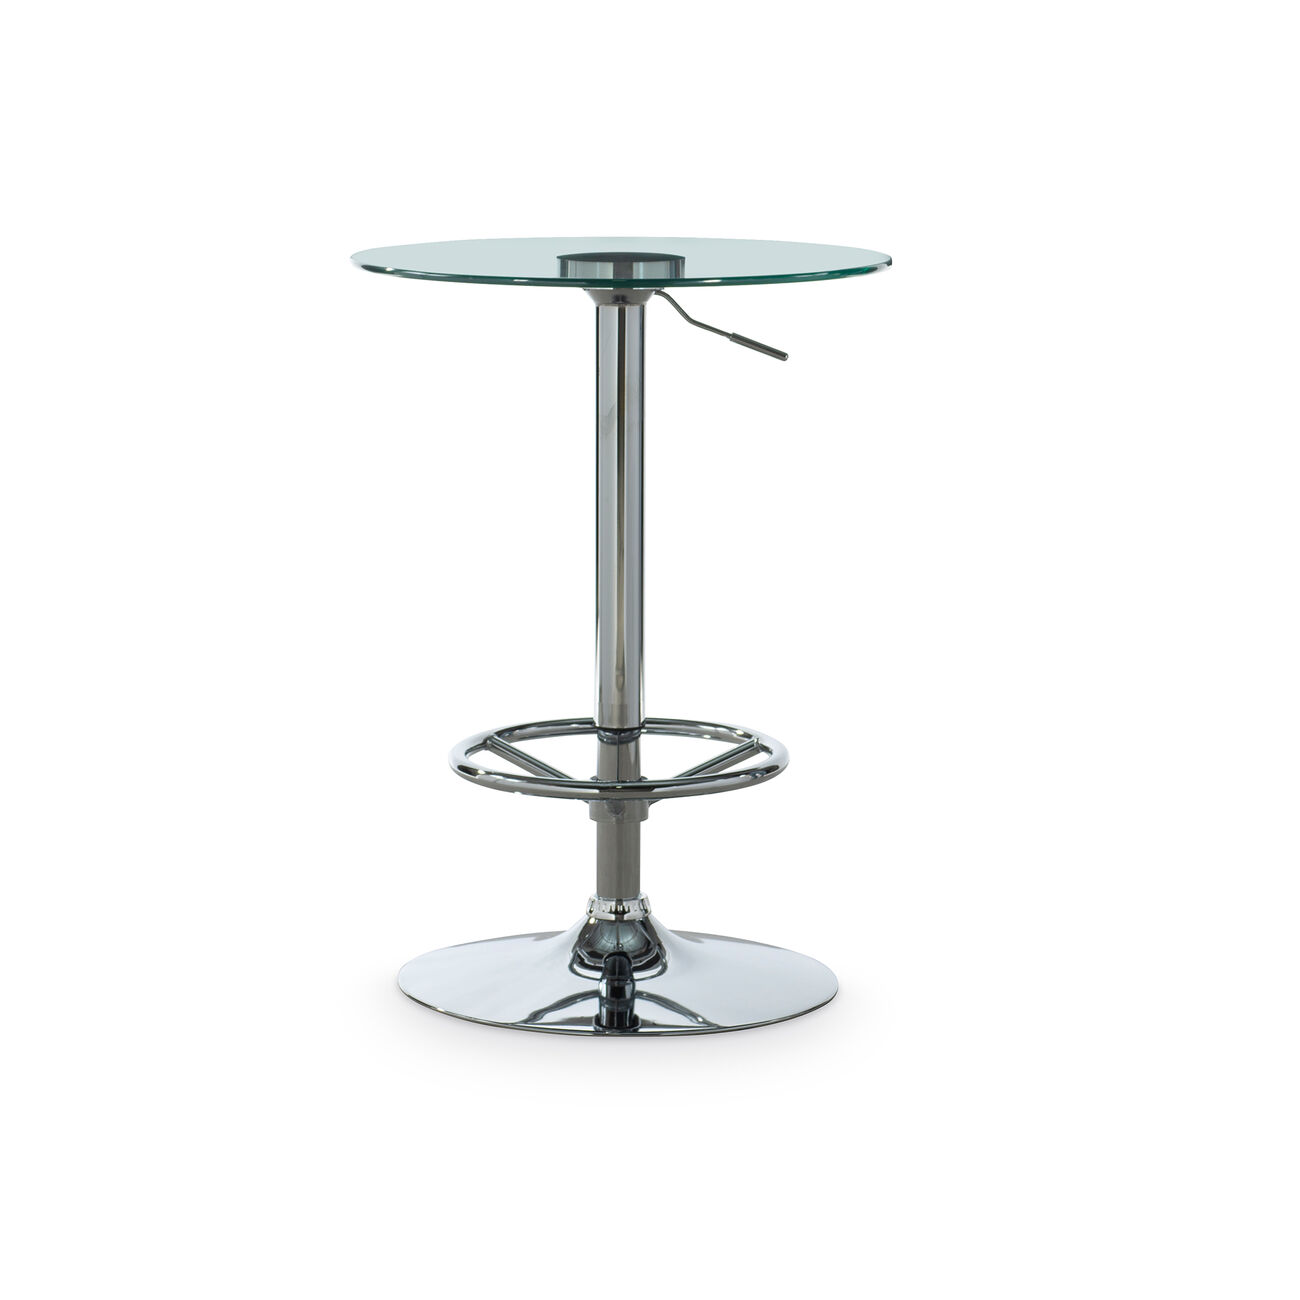 Round Glass Top Pub Table with Adjustable Height Mechanism, Silver